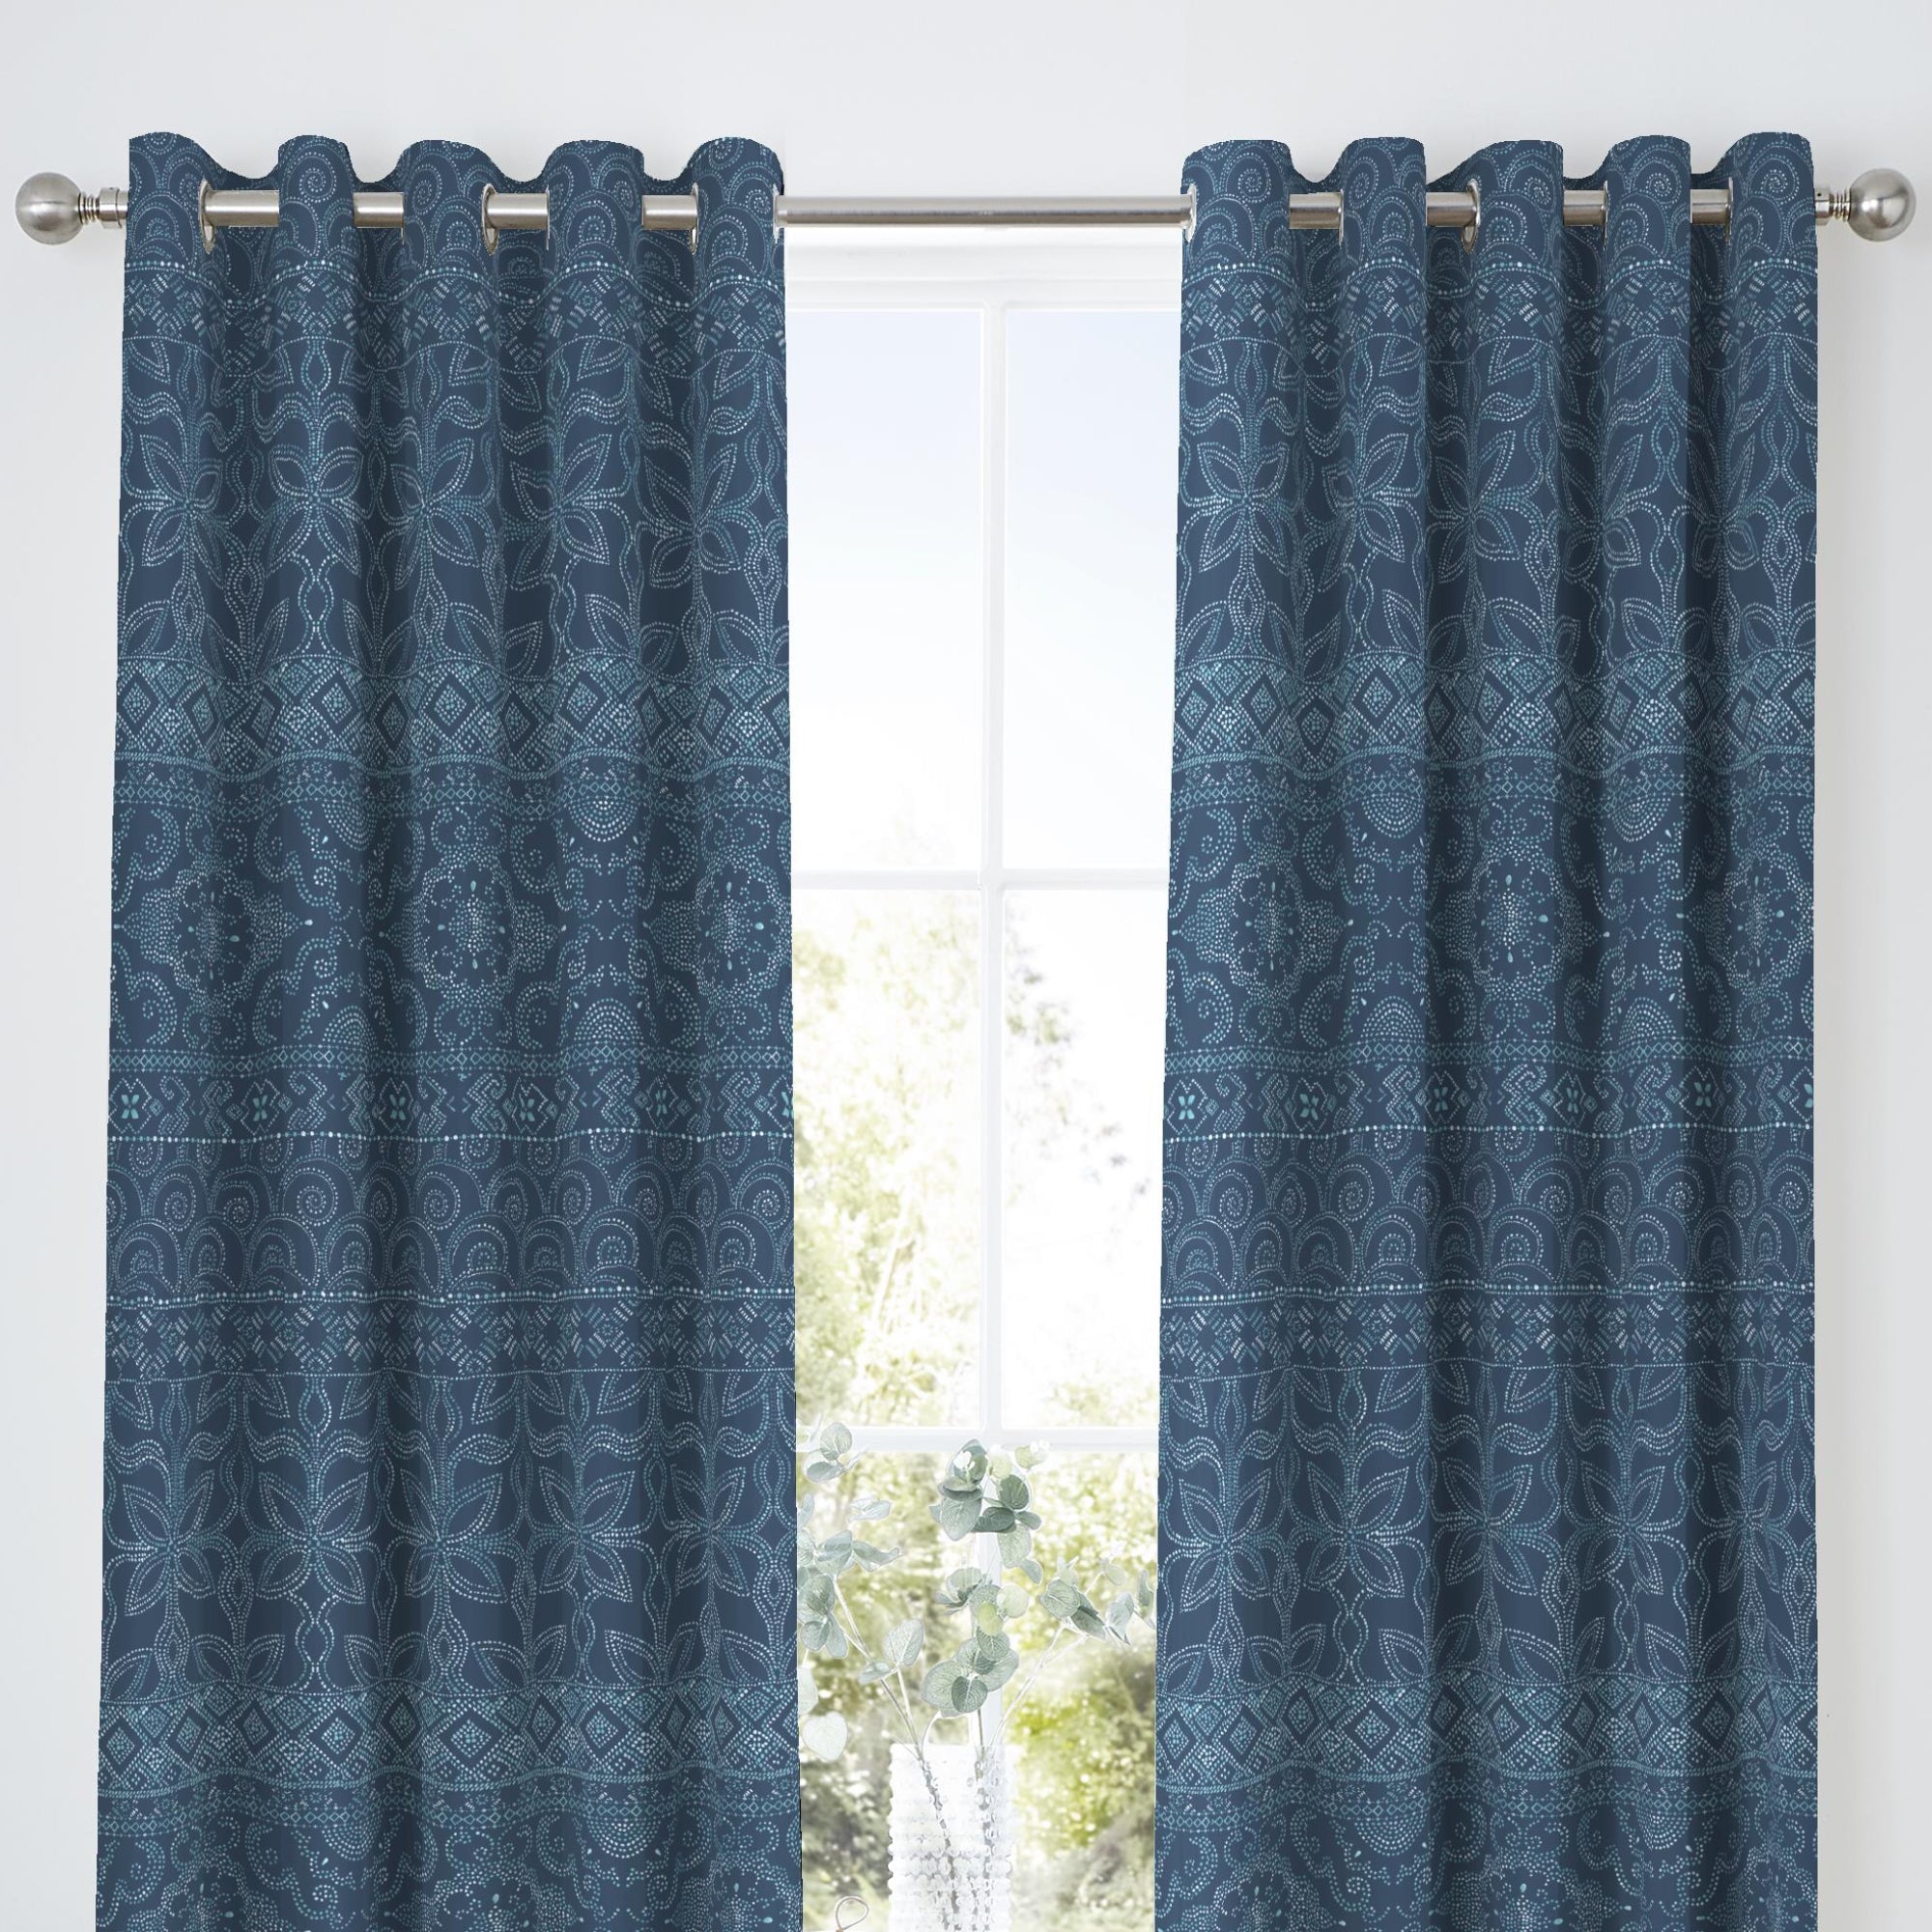 Pair of Eyelet Curtains Rohini by Dreams & Drapes Design in Blue